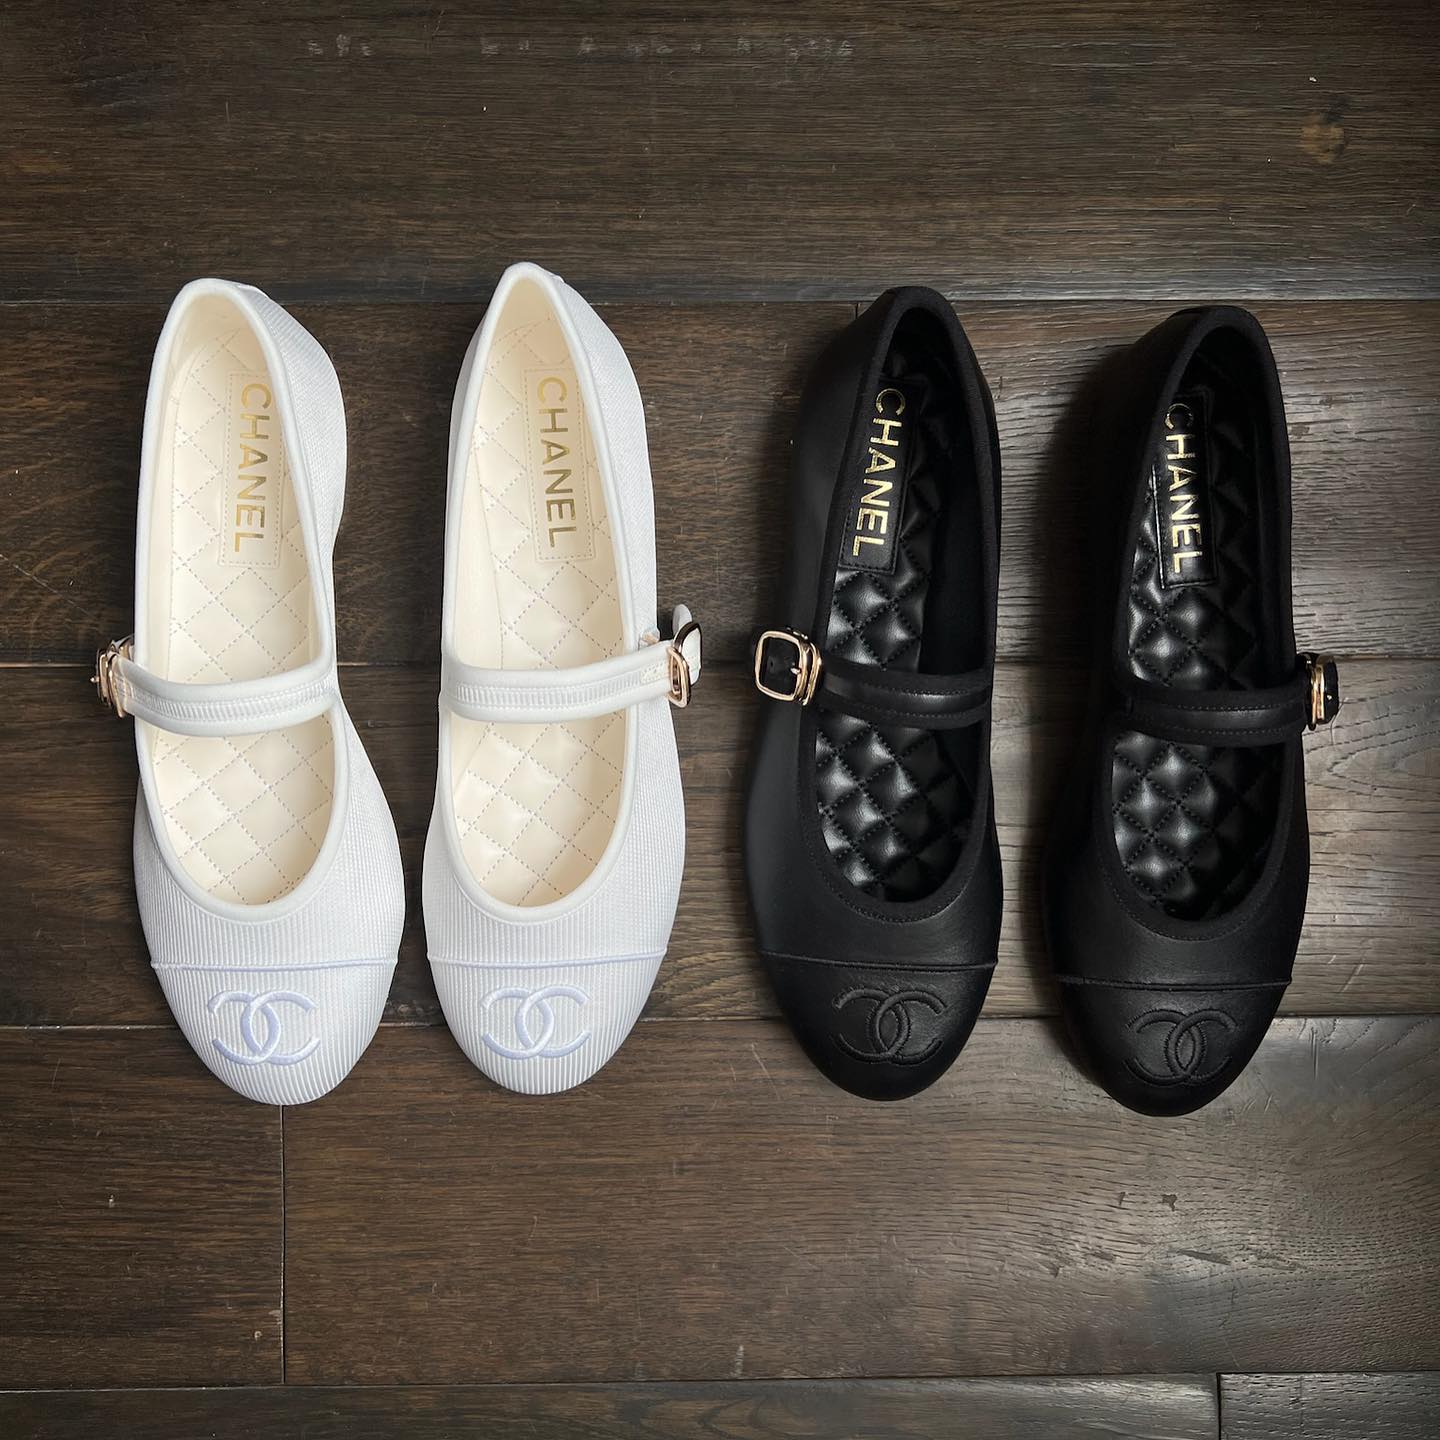 Two pairs of Chanel Mary Janes.